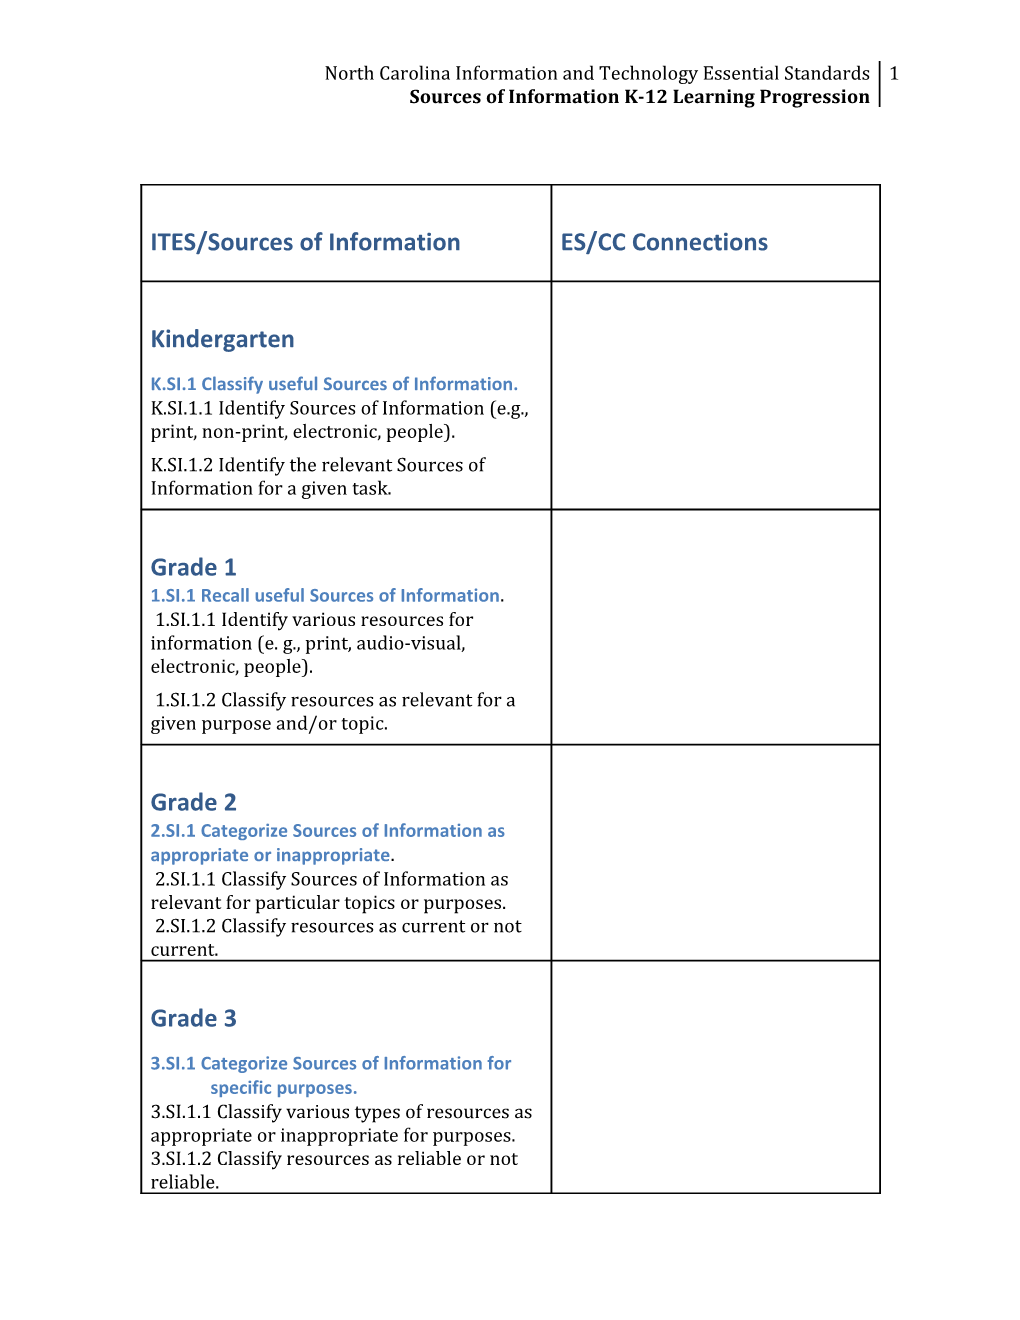 Sources of Information K-12 Learning Progression